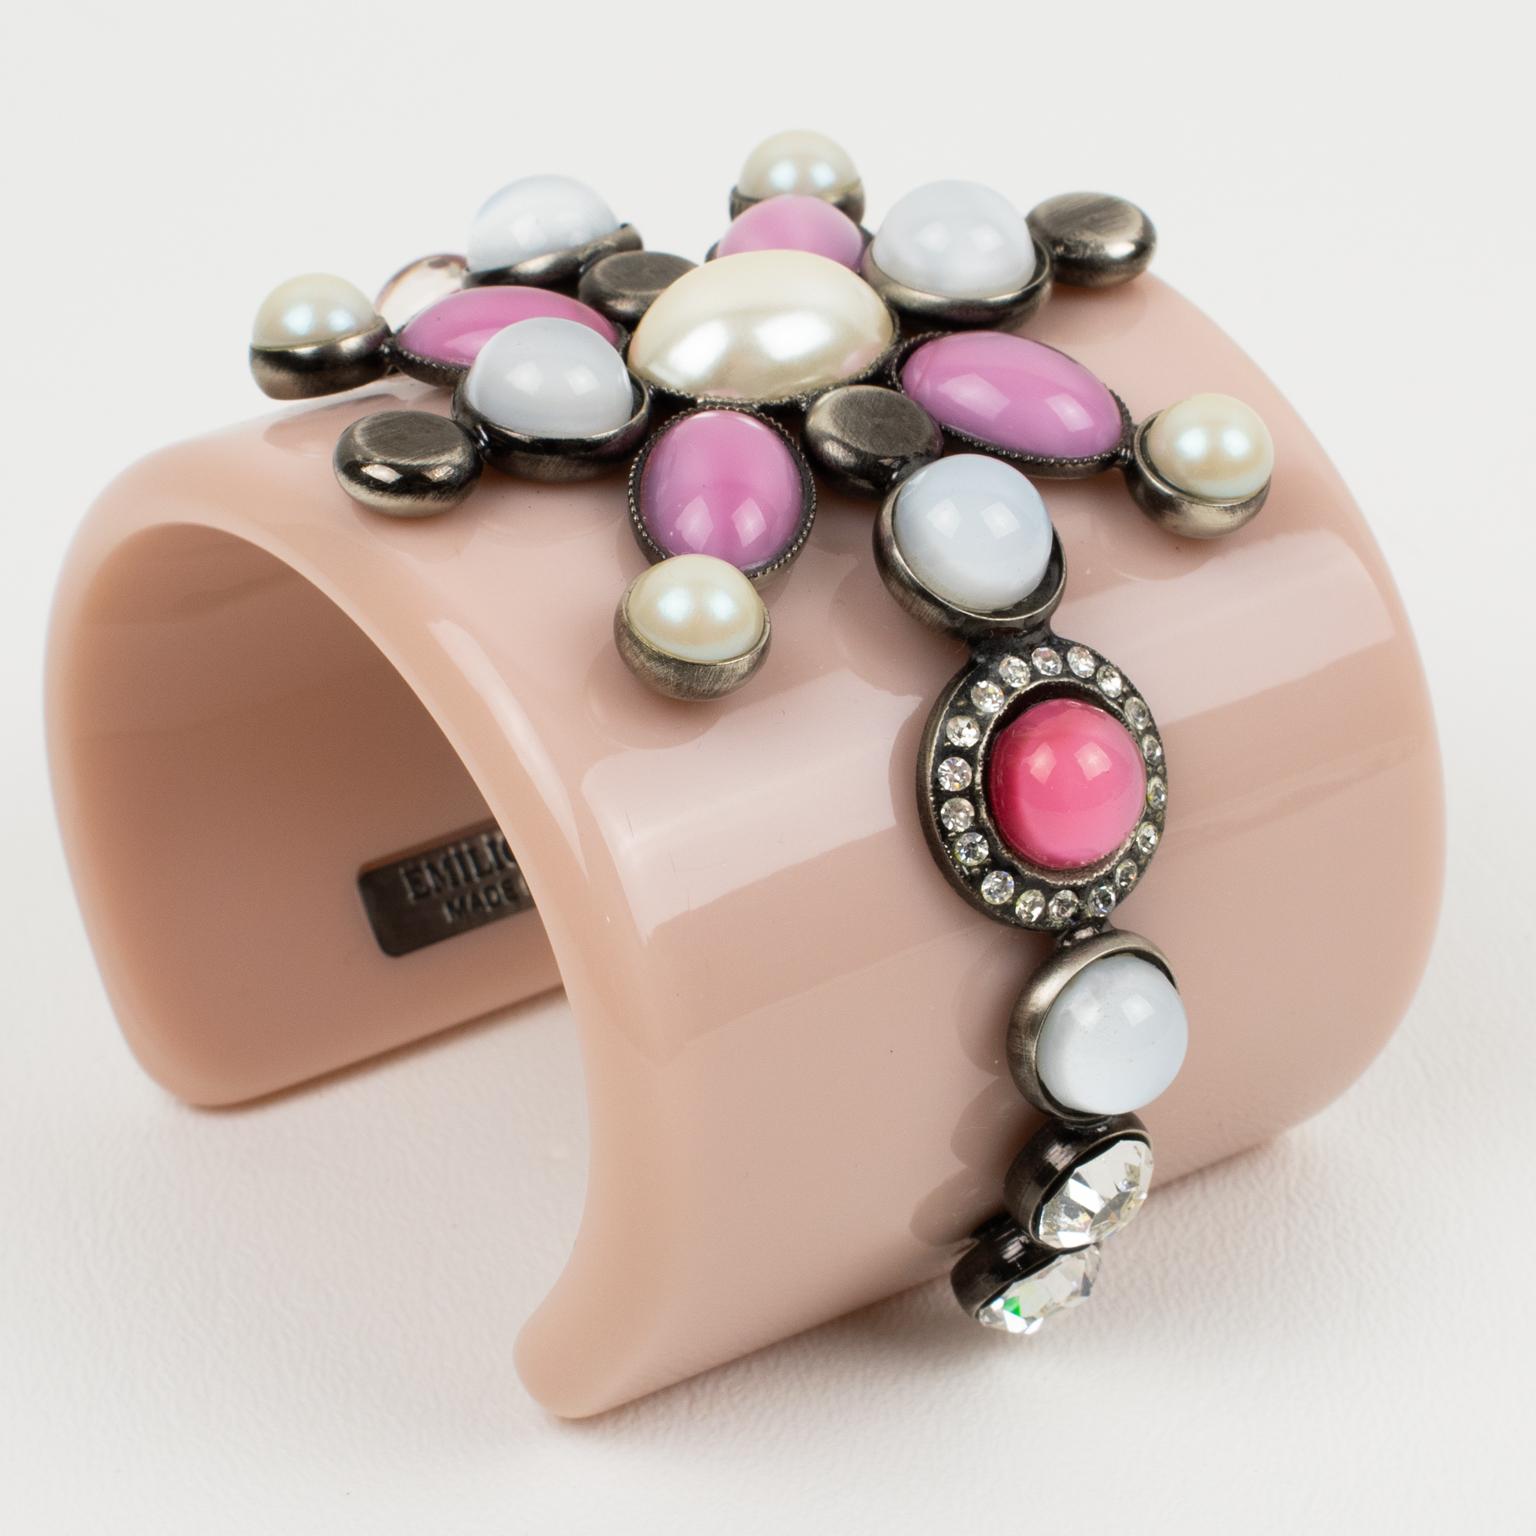 Emilio Pucci Jeweled Pale Pink Resin Bracelet Bangle In Excellent Condition For Sale In Atlanta, GA